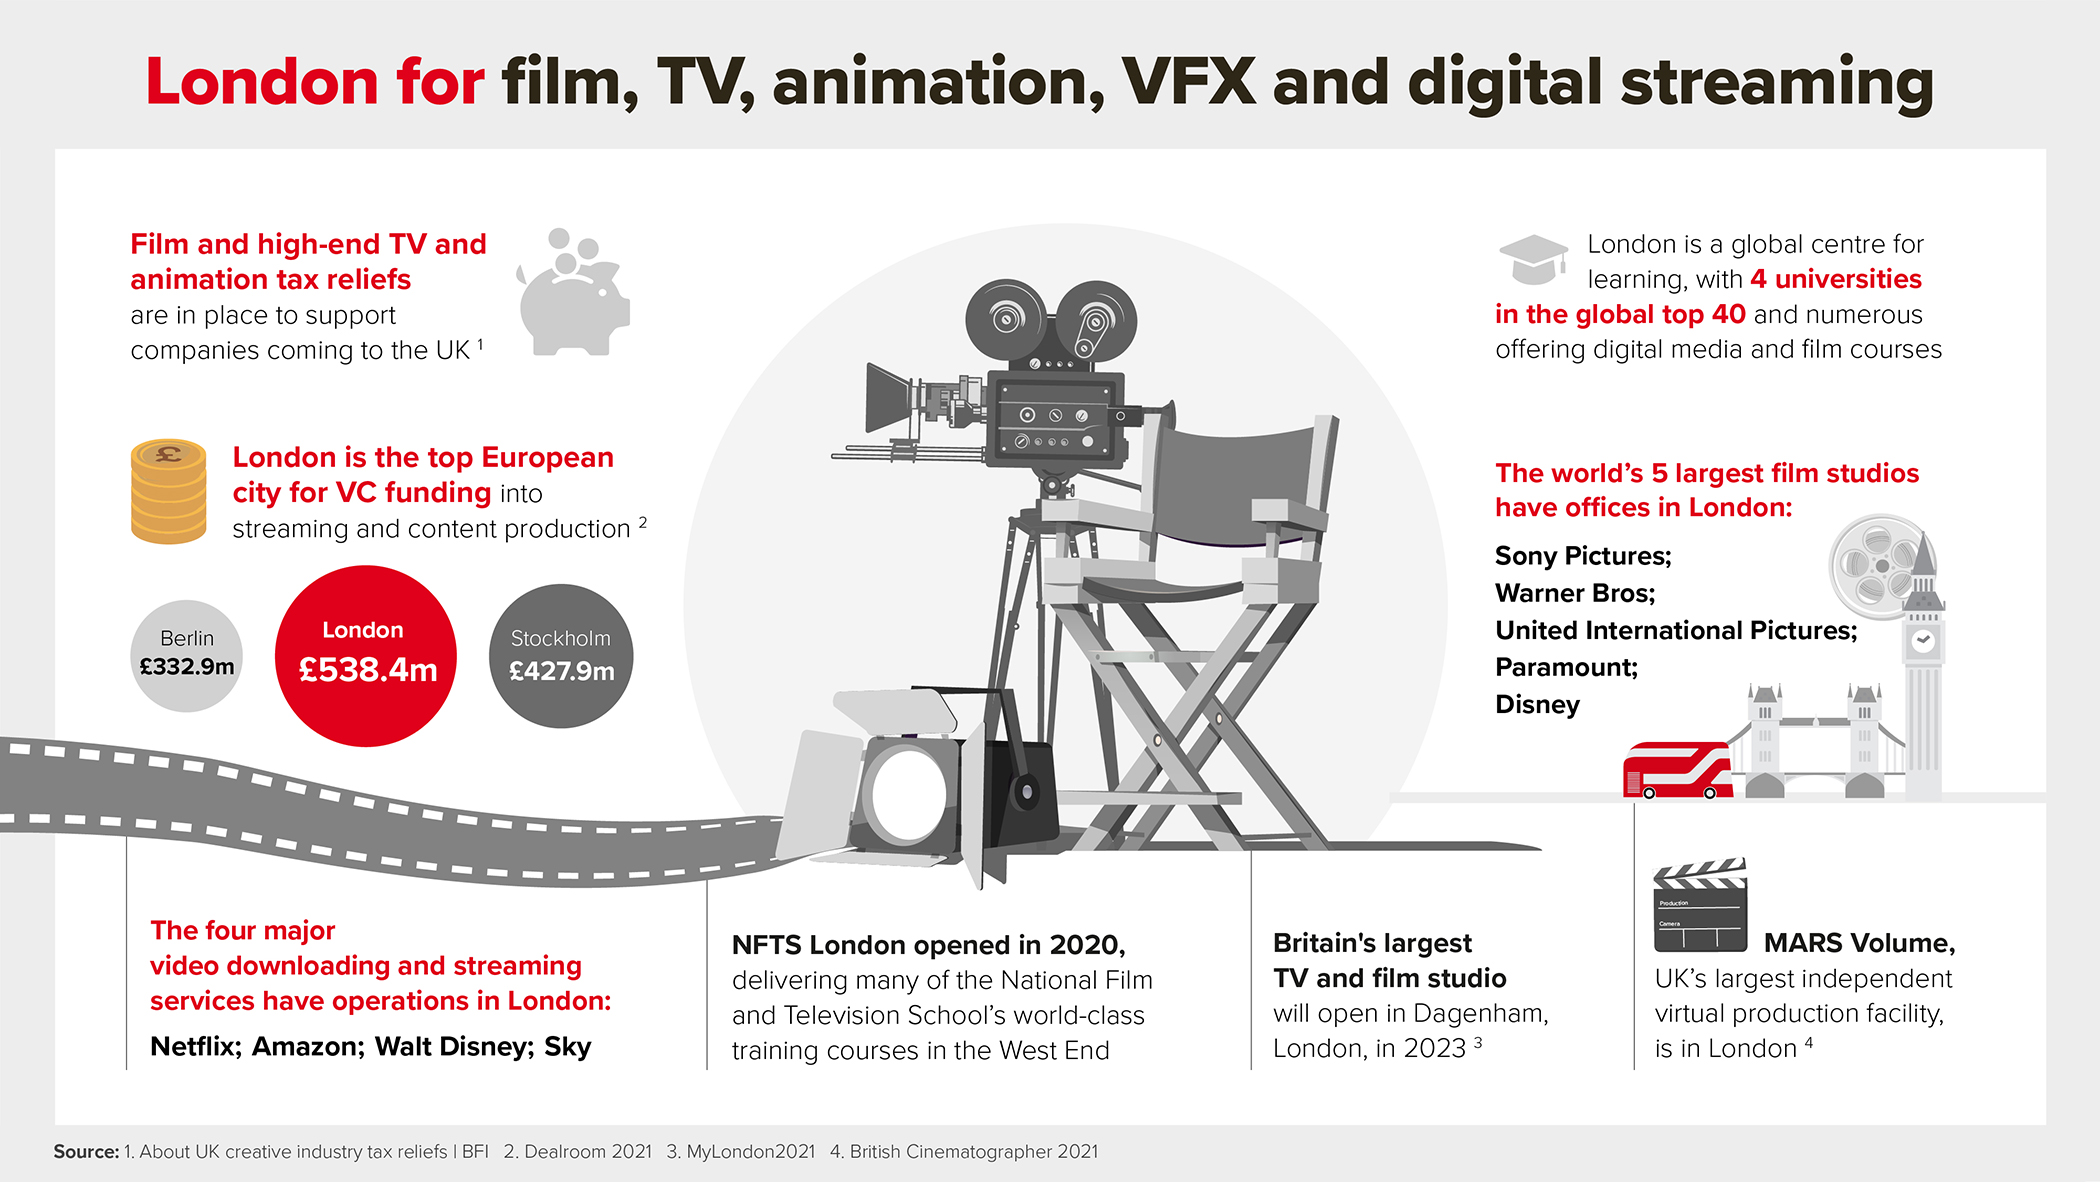 Infographic with statistics and figures for London's film and digital scene.